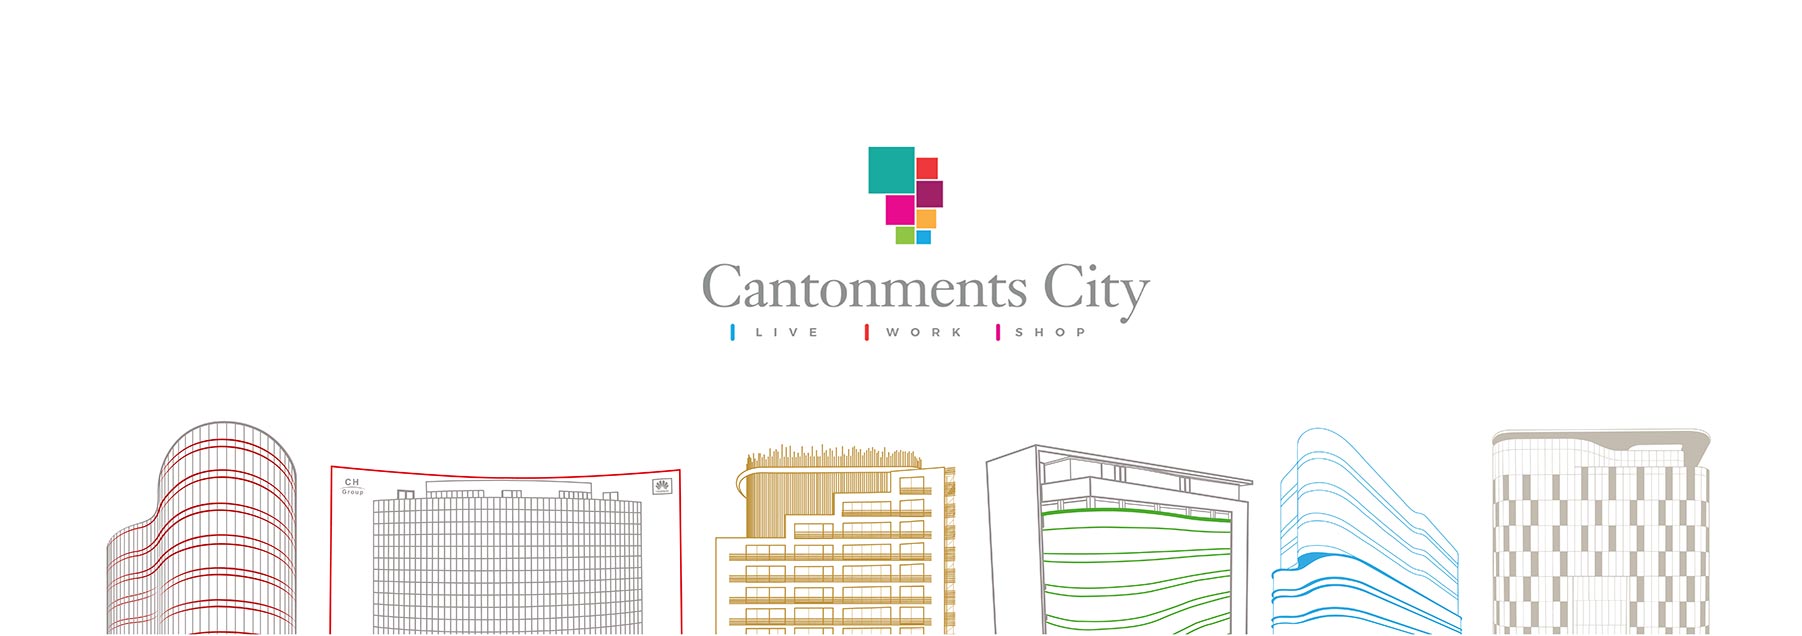 Cantonments-City-banner